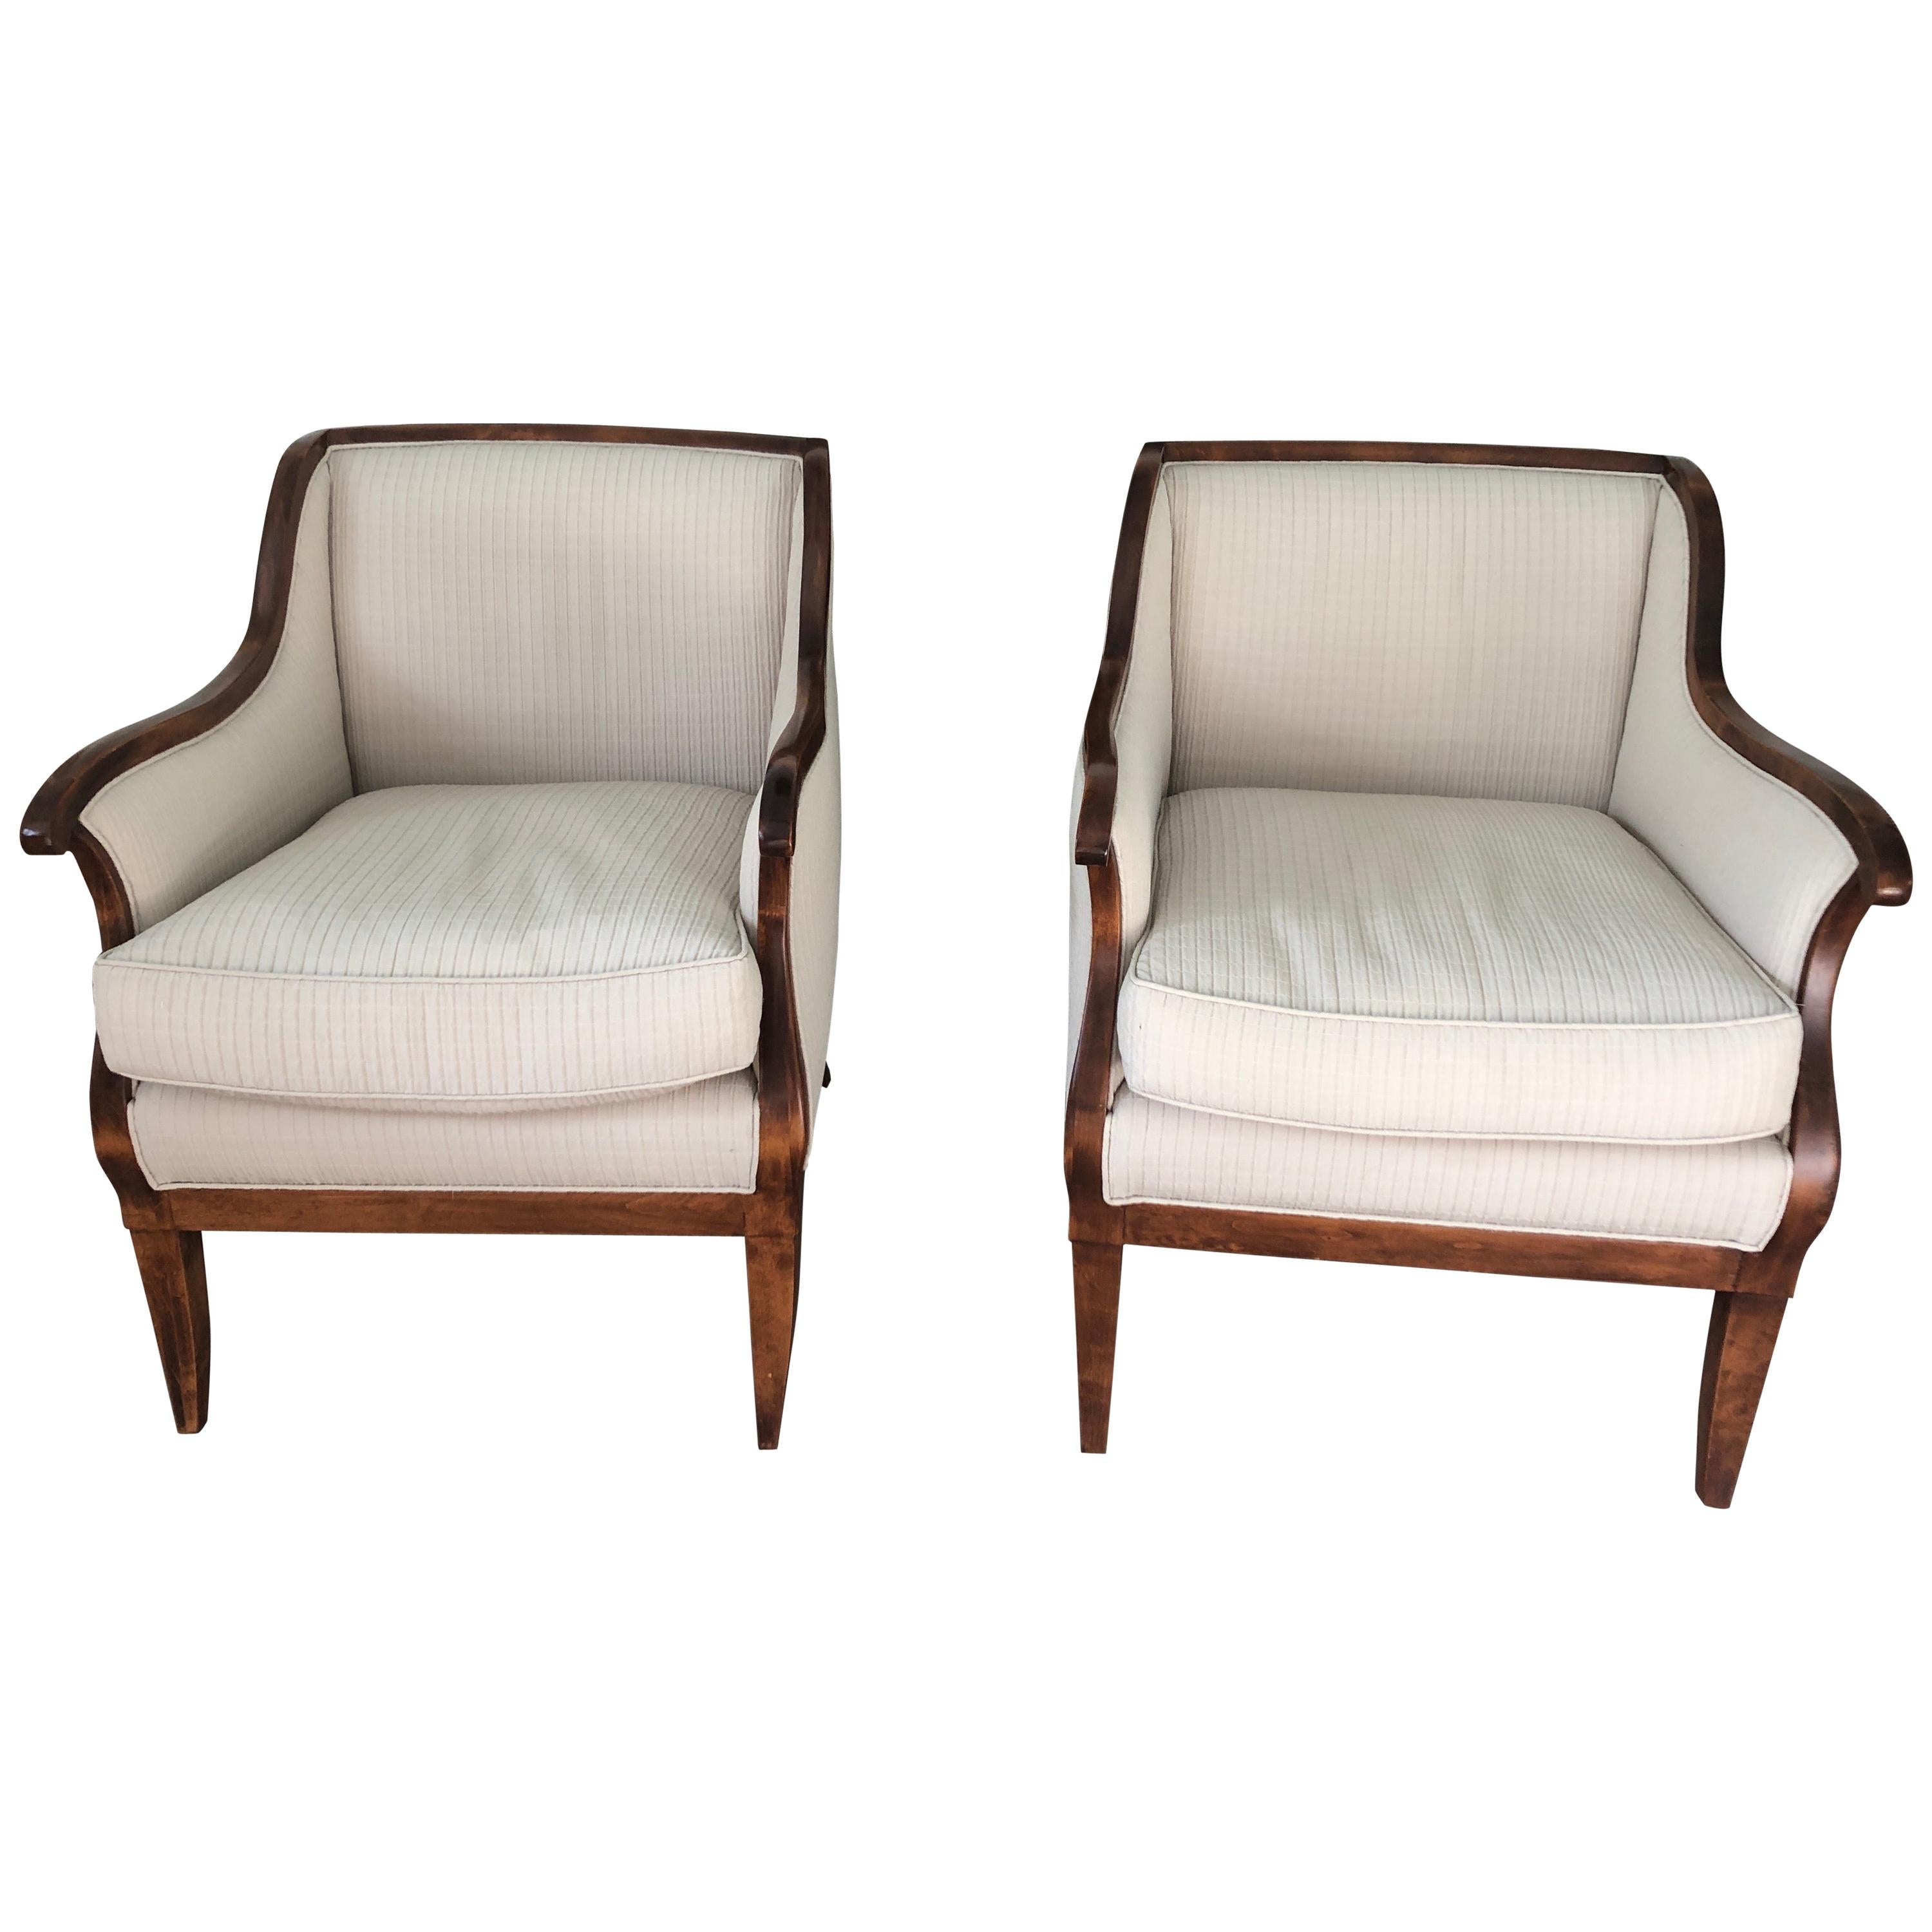 Elegant Pair of Mahogany and Upholstered French Vintage Club Chairs